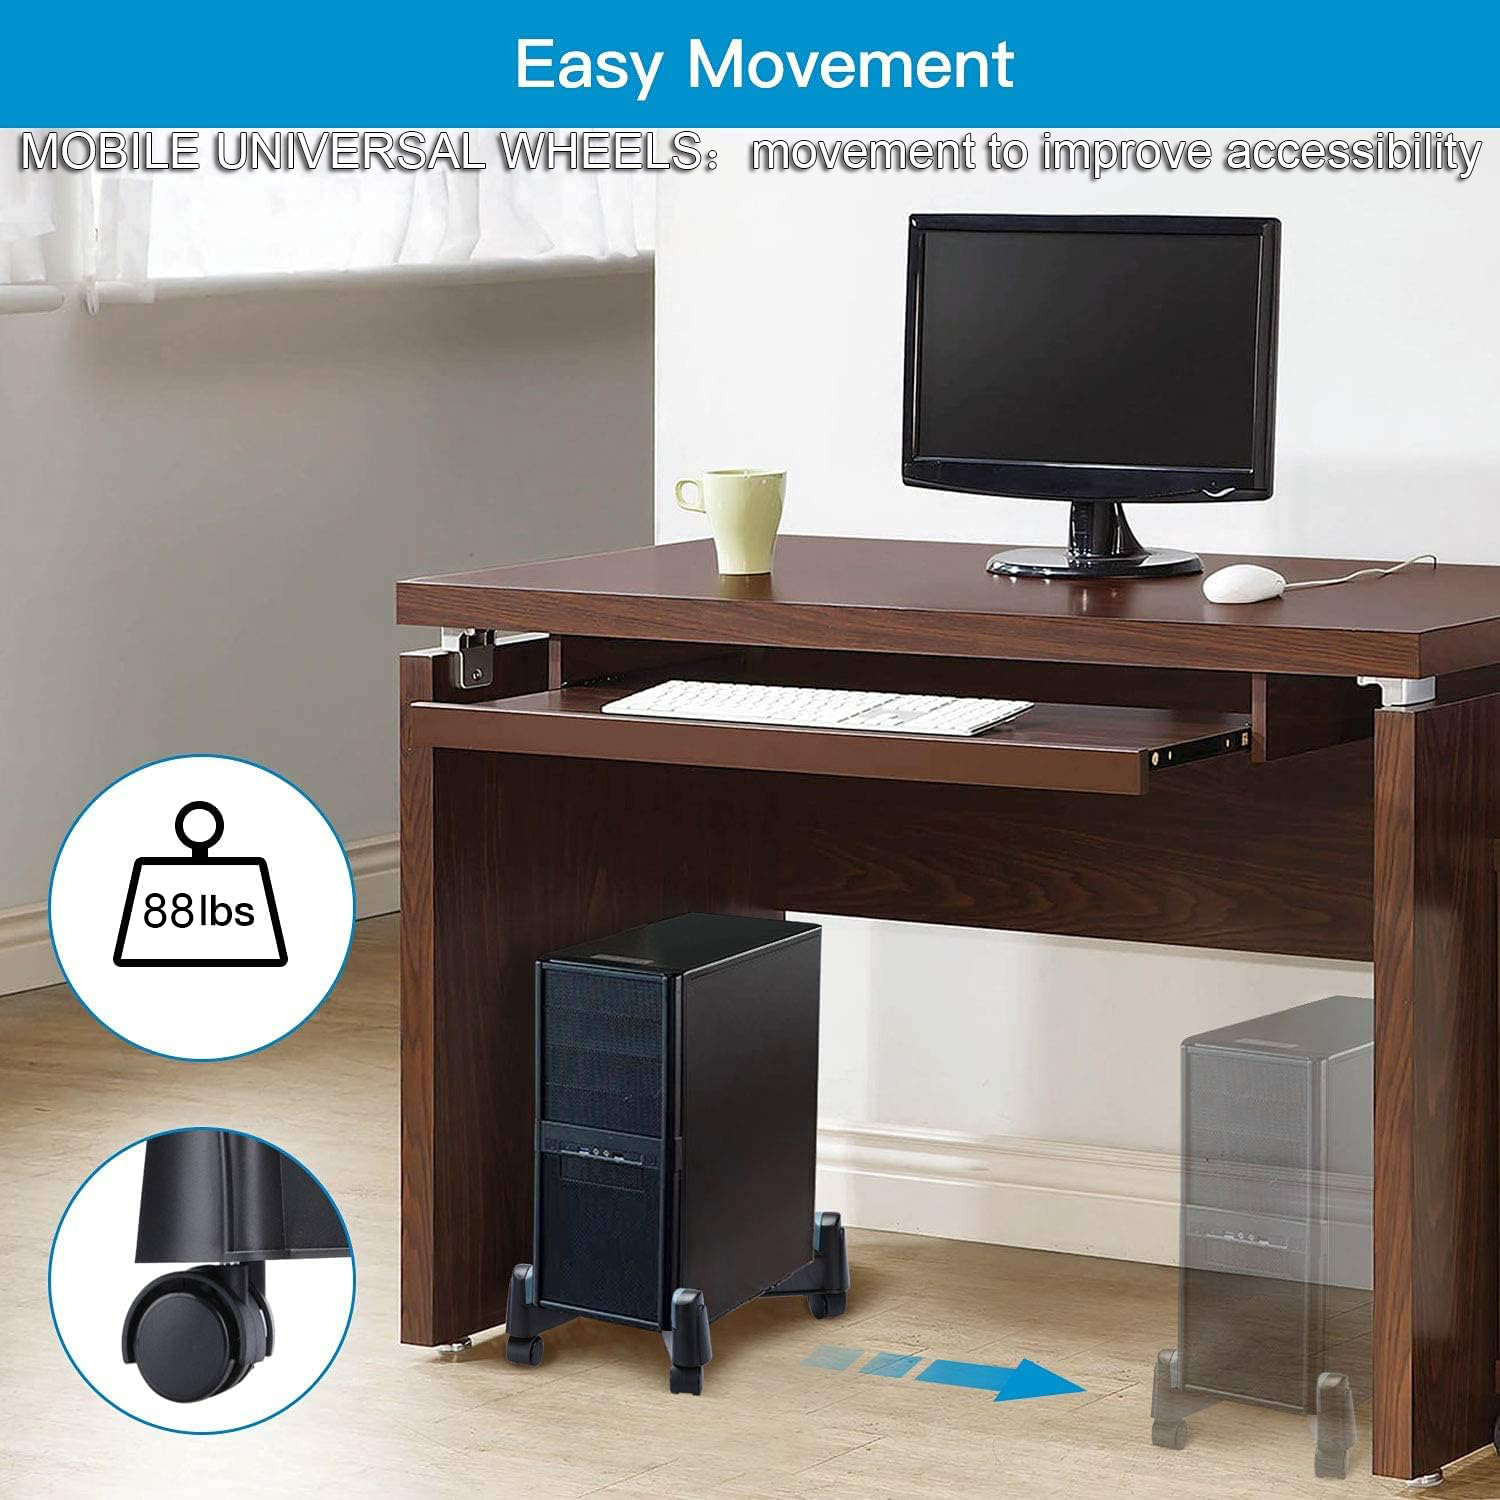 PC-Accessories-Mobile-CPU-Stand-Desktop-Computer-Tower-Holder-Cart-with-Adjustable-Width-and-4-Caster-Wheels-Fits-Most-PC-or-Computer-Cases-Under-Desk-17